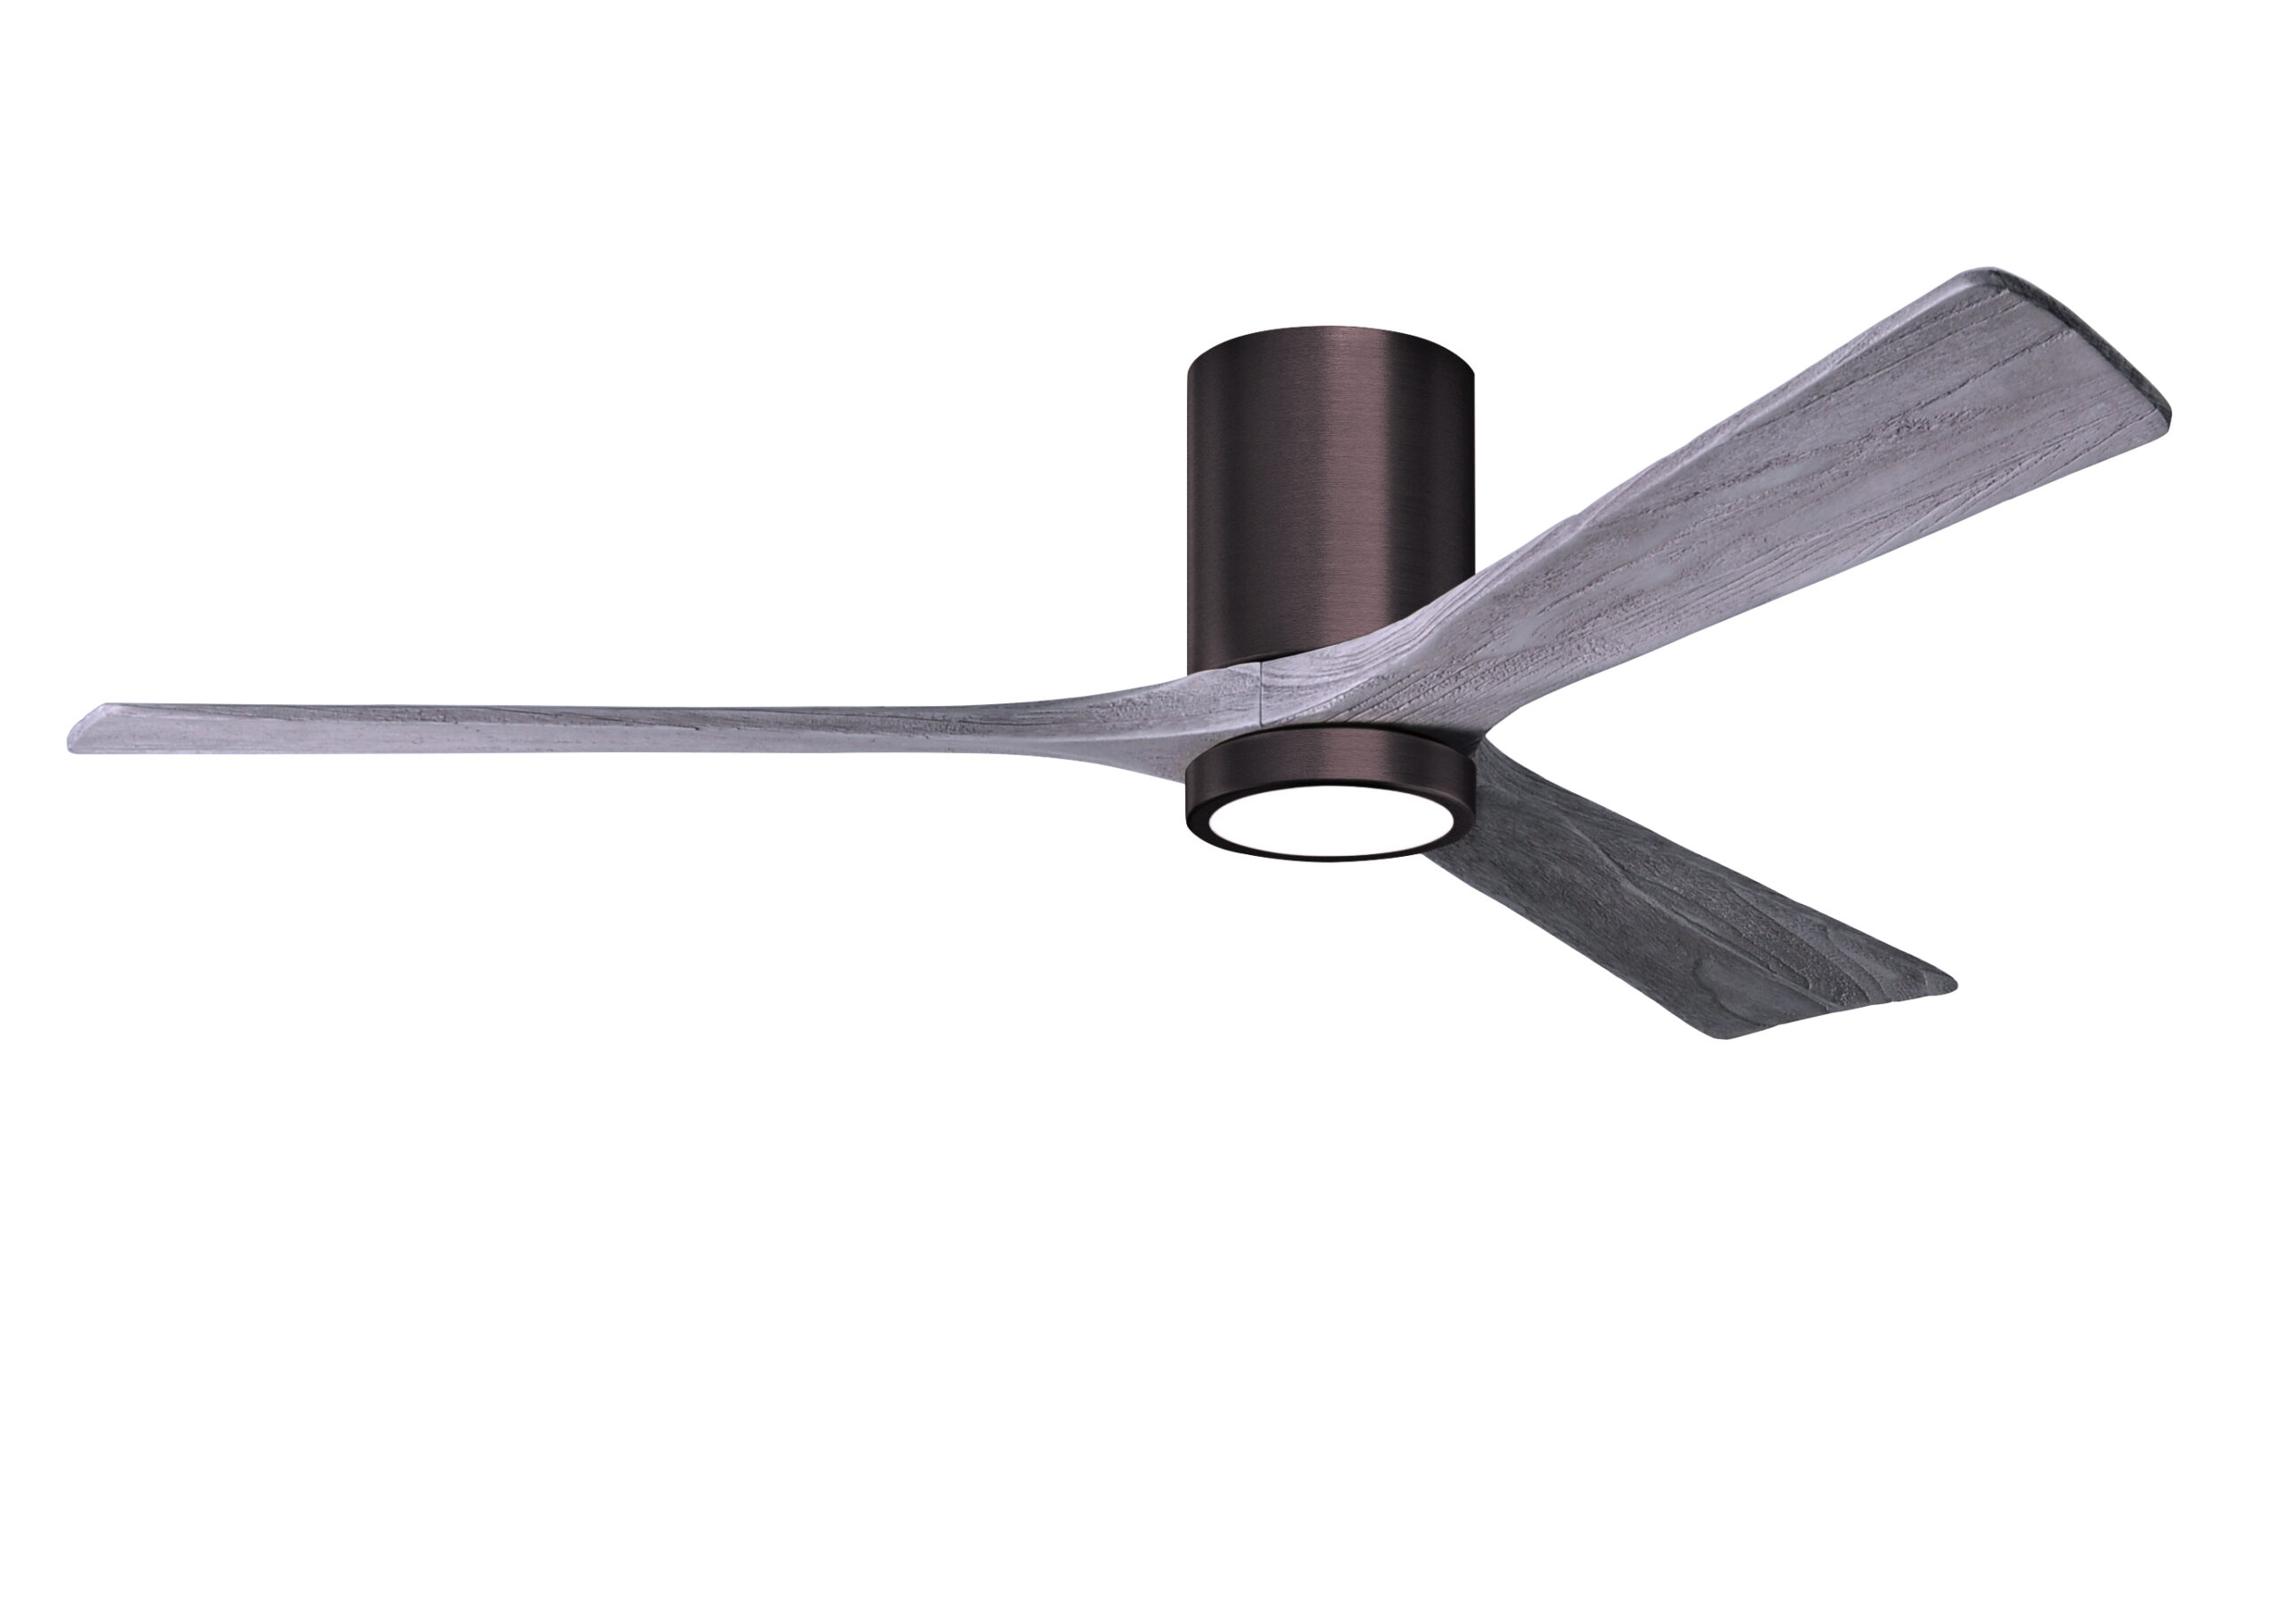 Irene-3HLK Ceiling Fan in Brushed Bronze Finish with 60